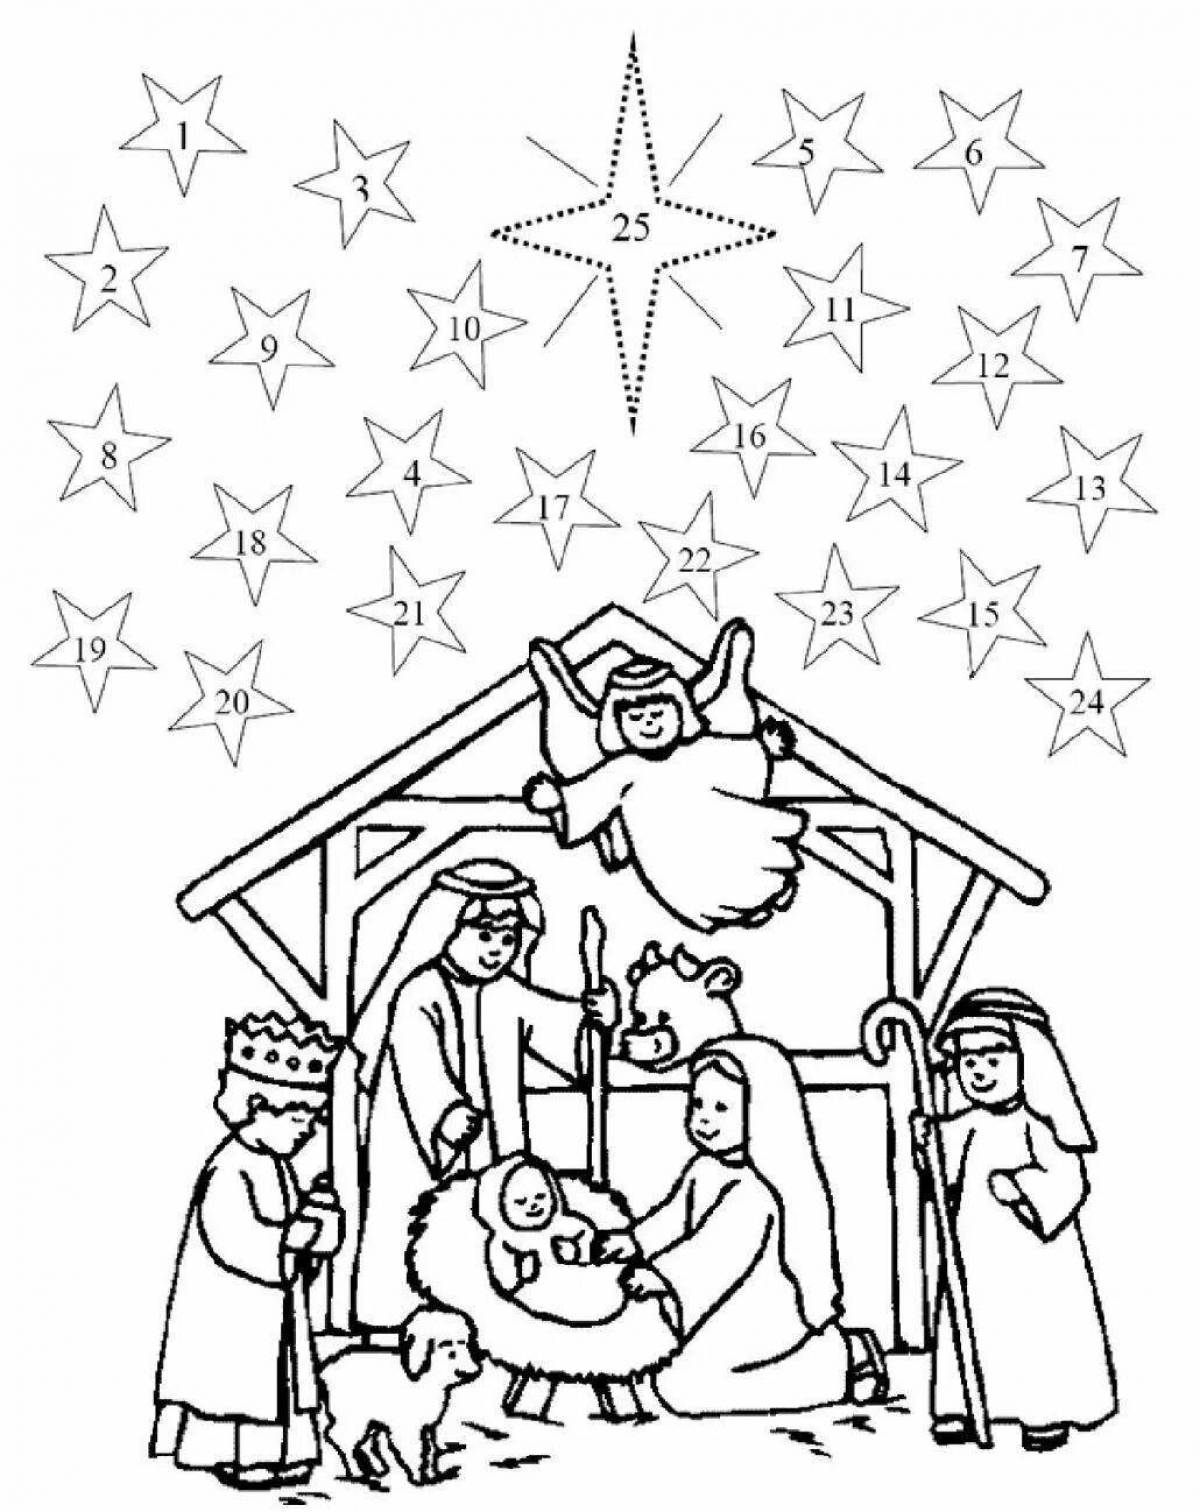 Fabulous Christmas coloring book for 3-4 year olds